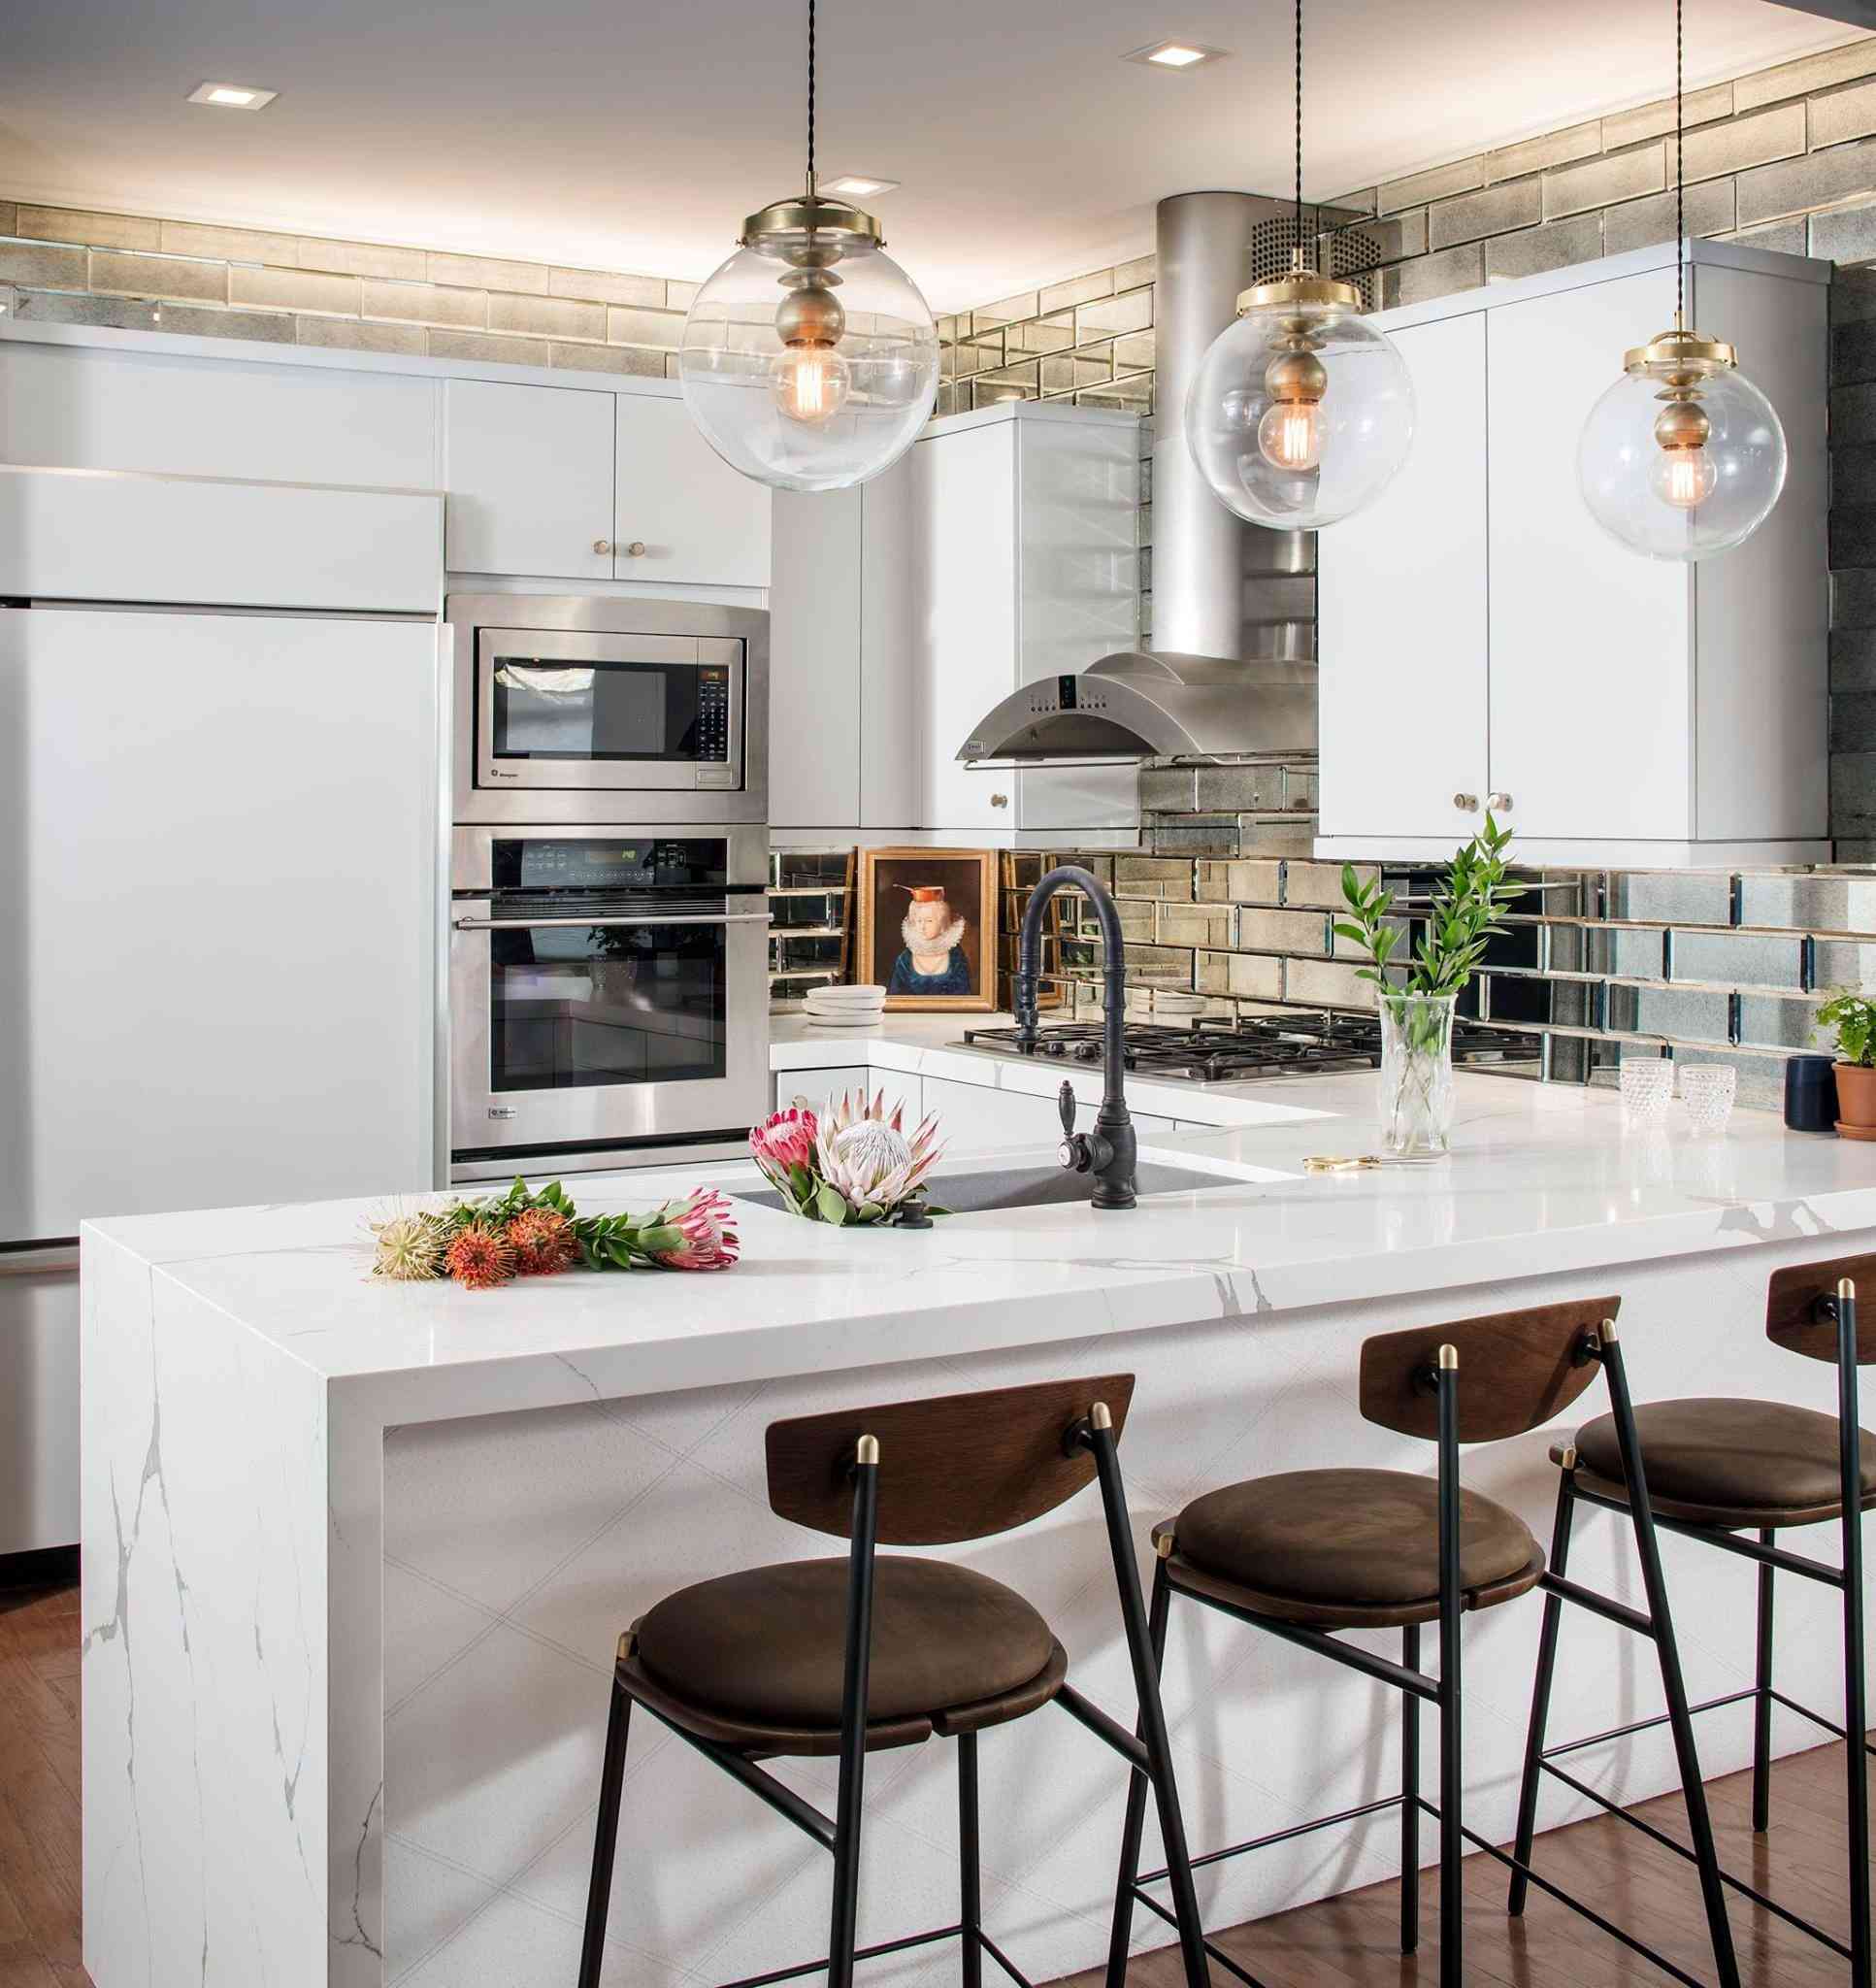 white kitchen with pendant lights, chairs, and built-in appliances